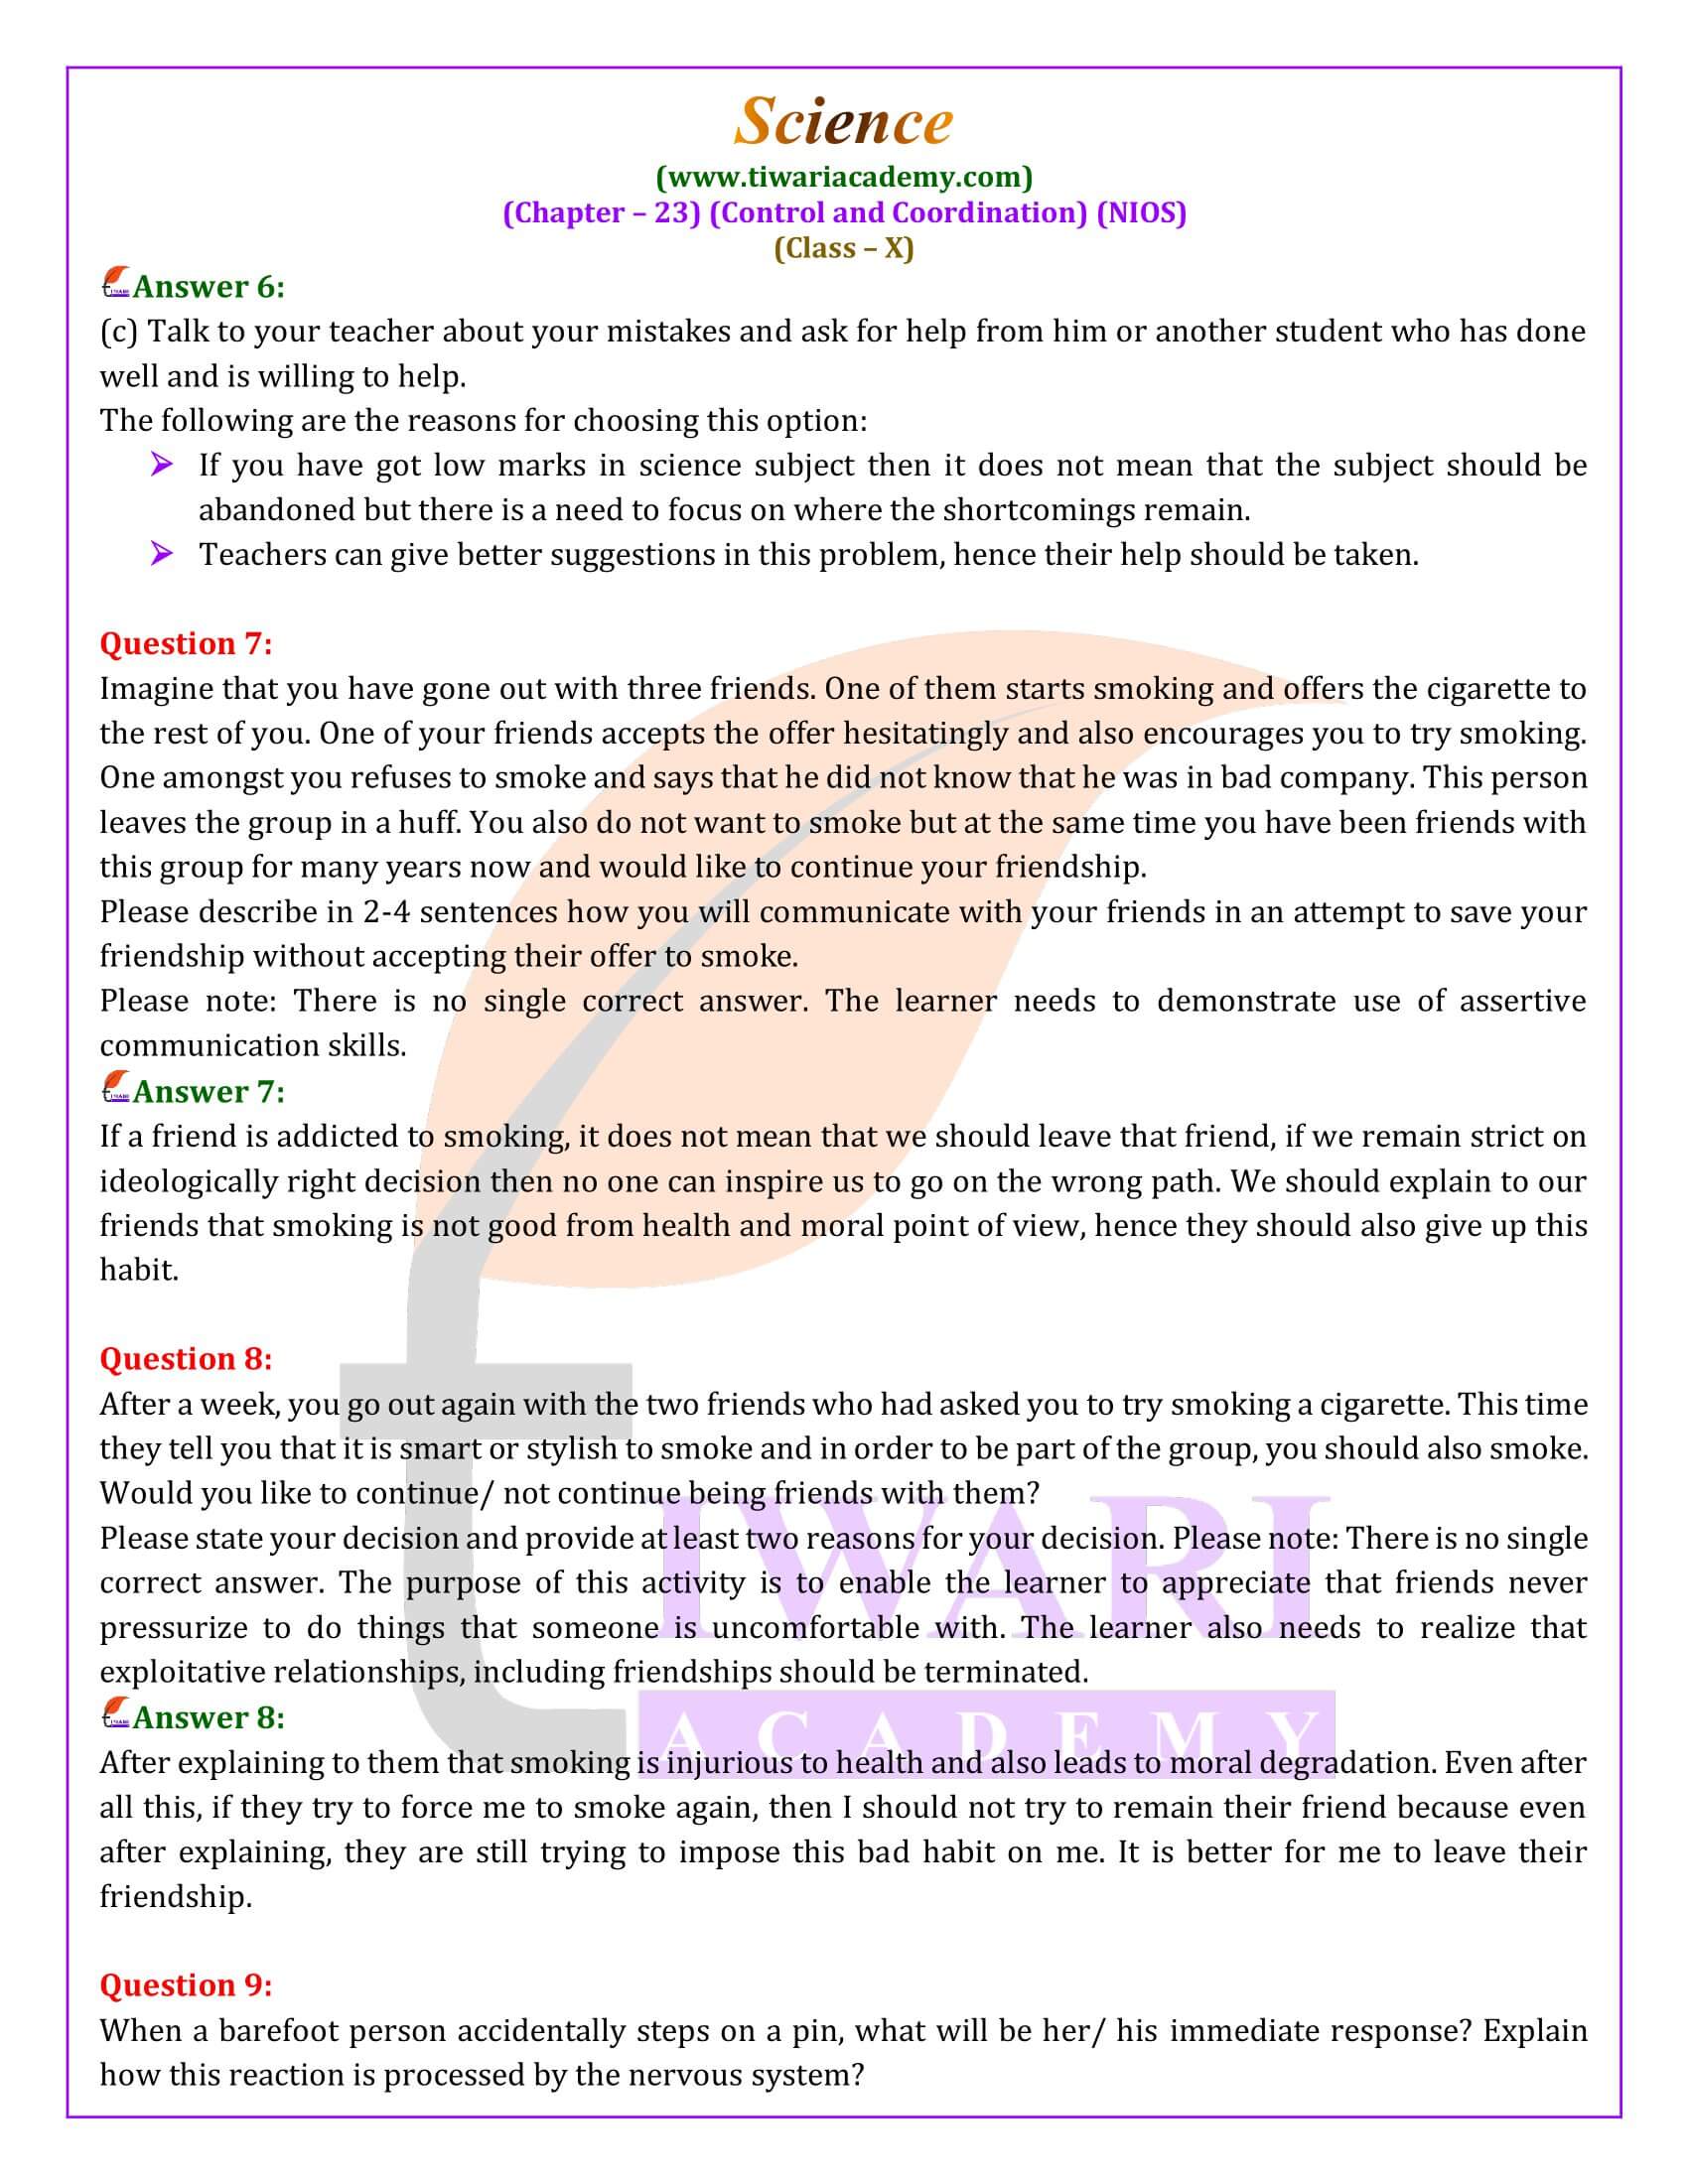 NIOS Class 10 Science Chapter 23 Solution in English